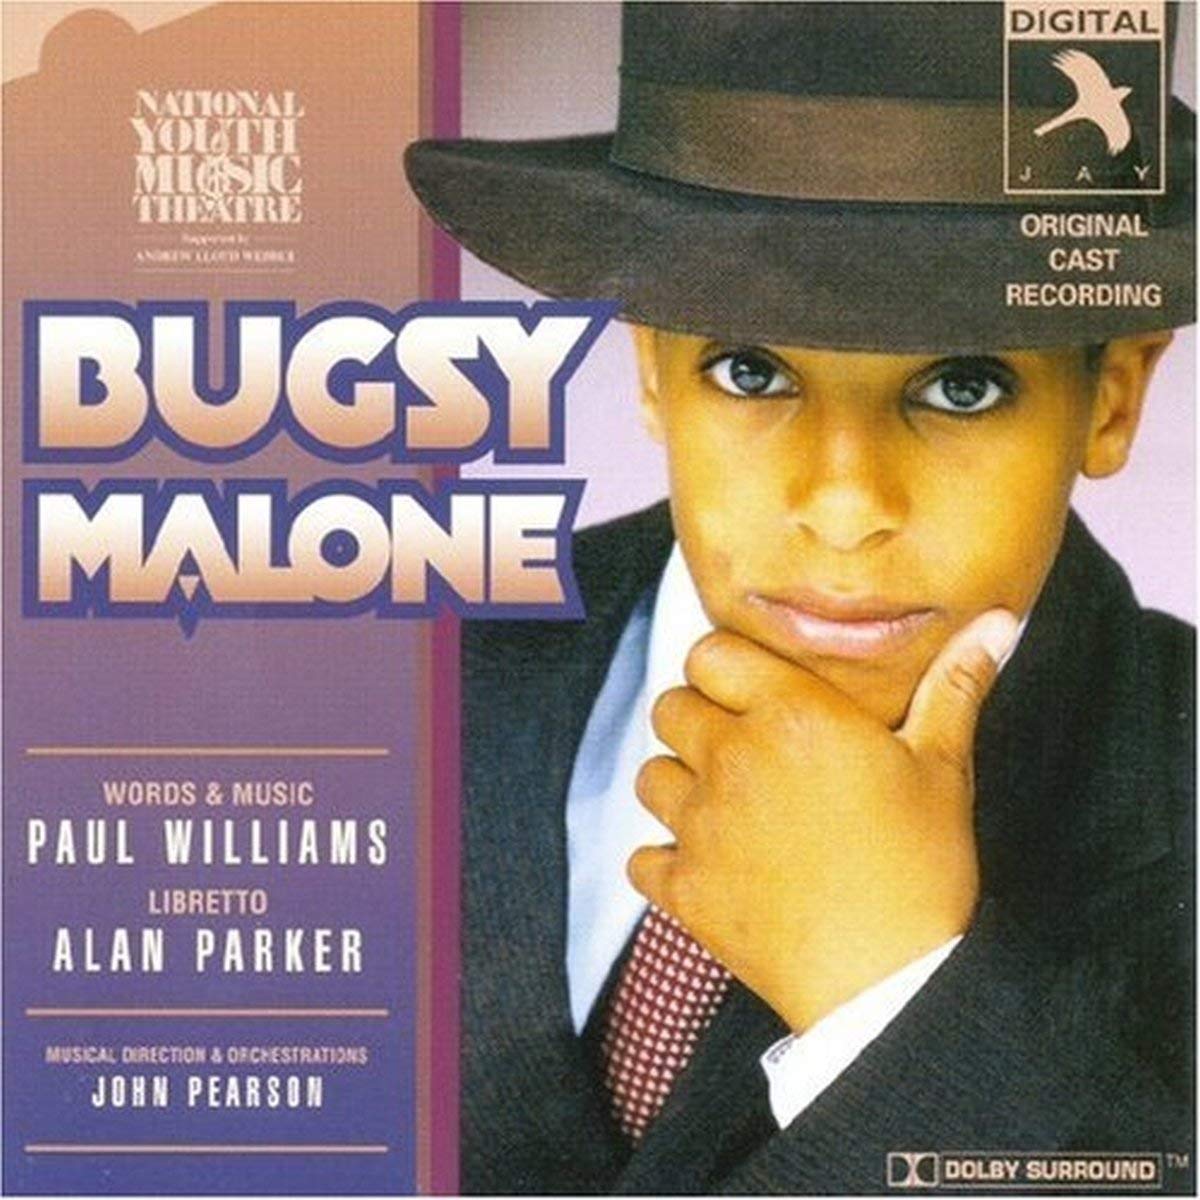 bugsy malone NYMTbugsy malone National Youth Music Theatre